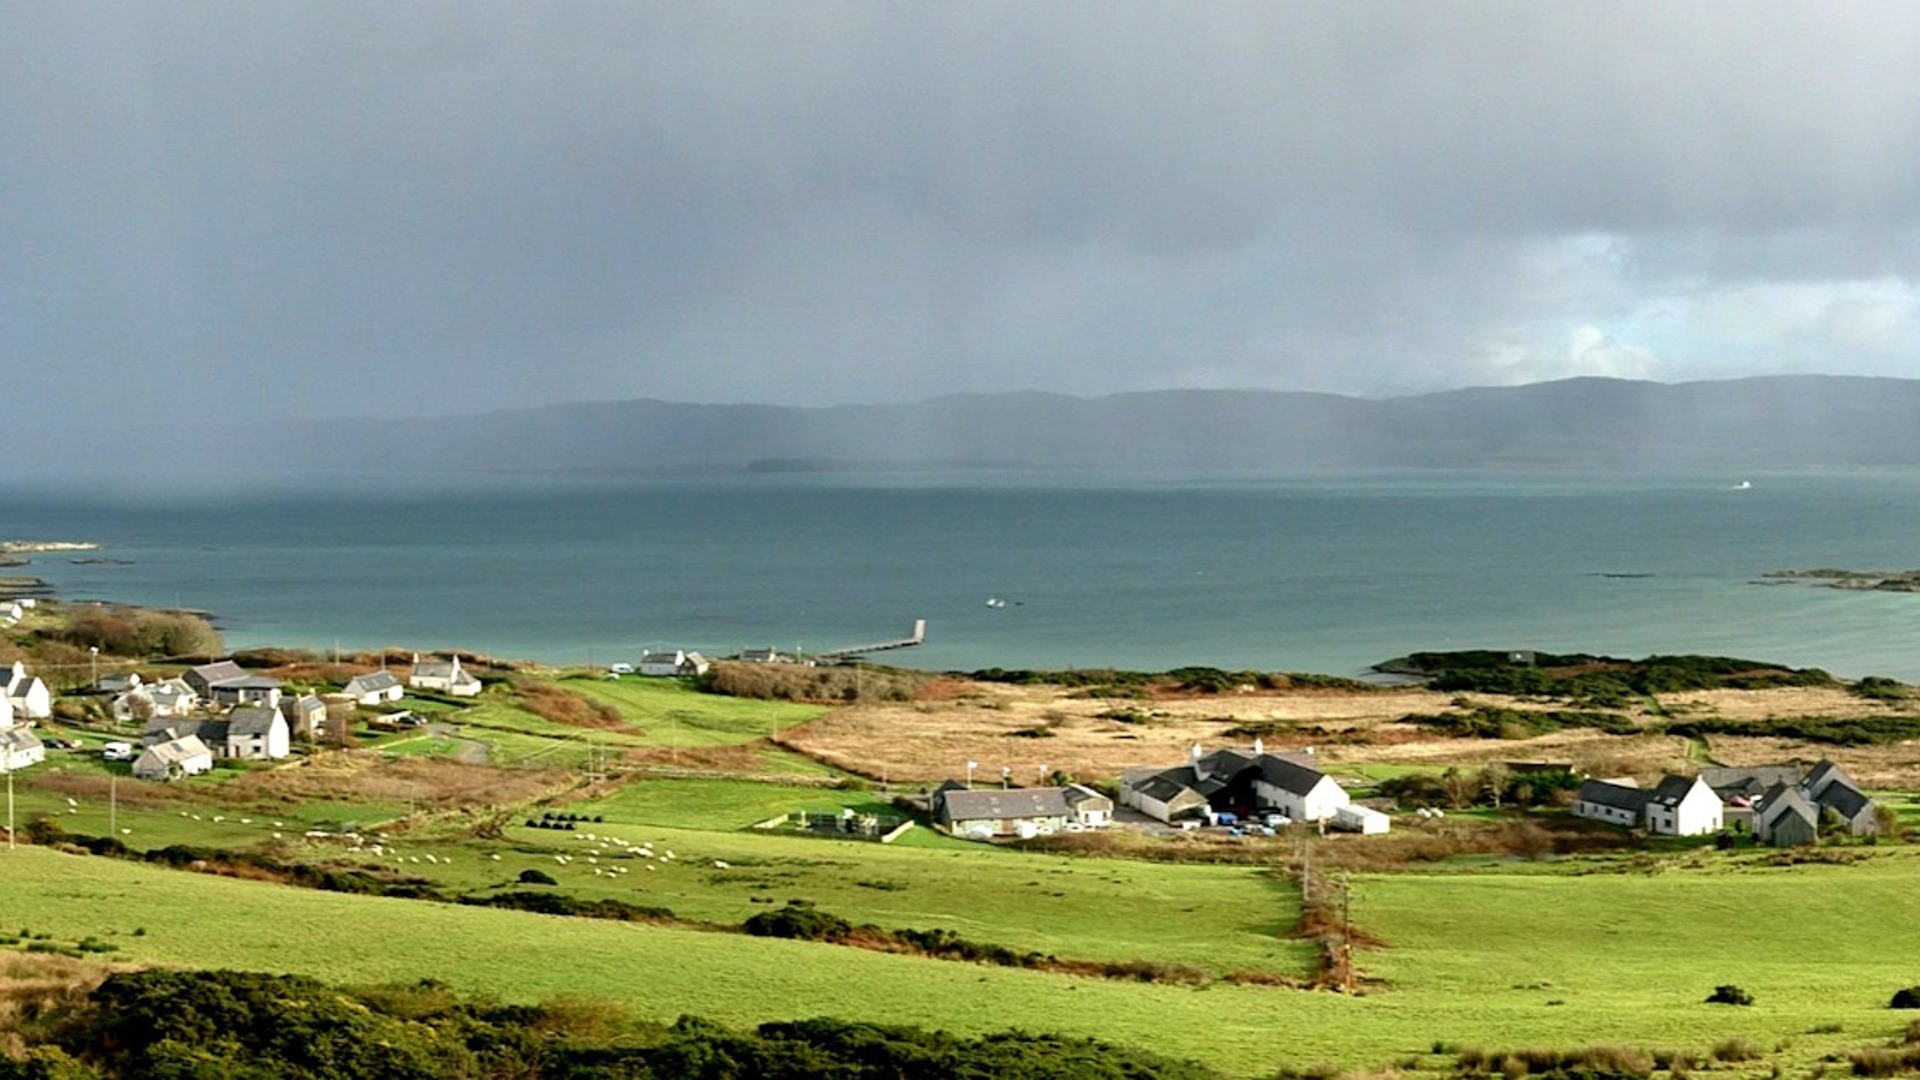 A landscape in Gigha